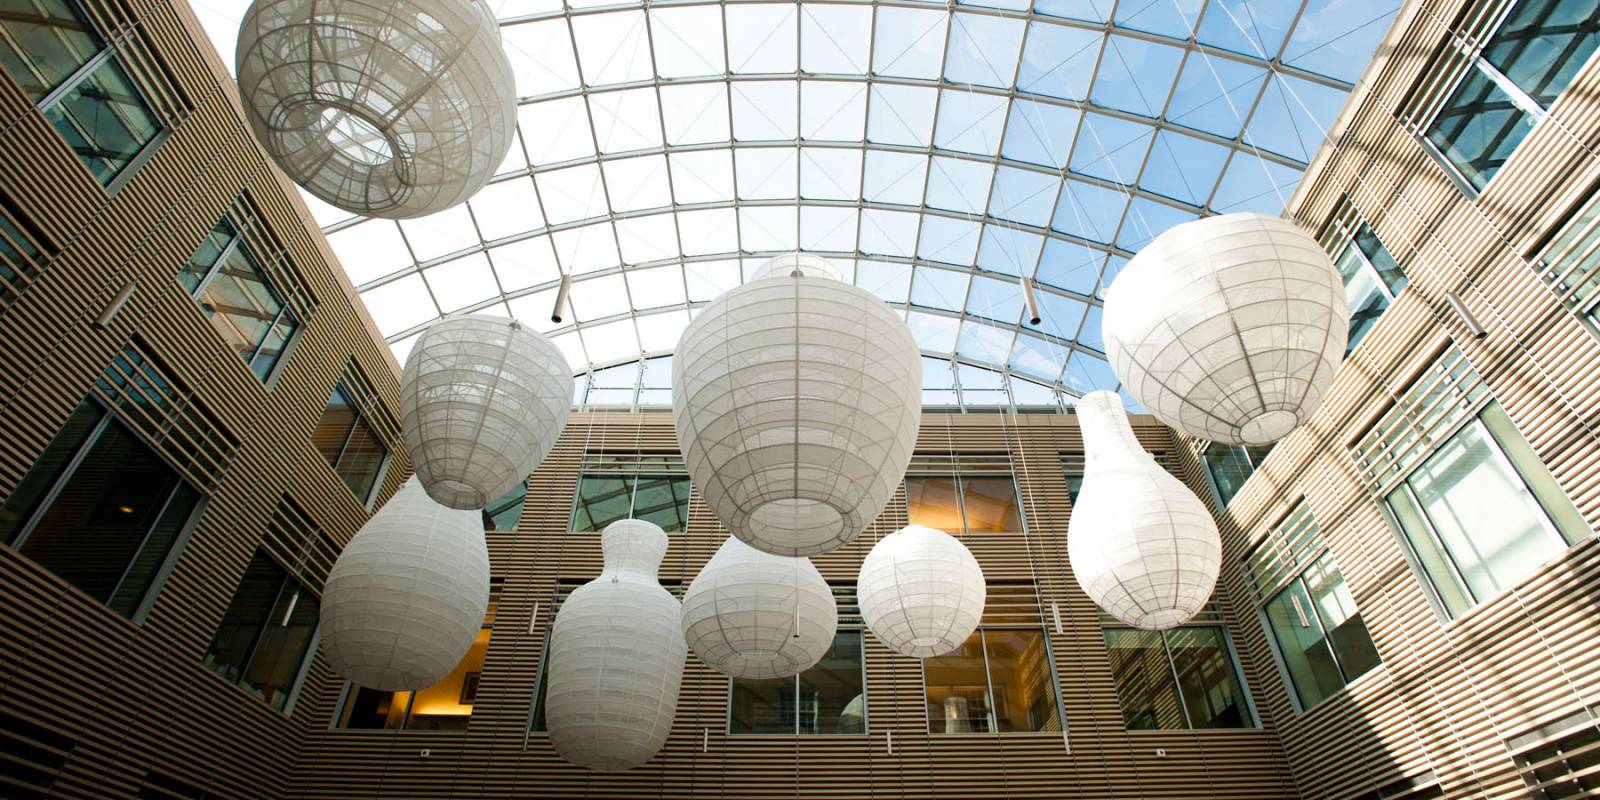 Lantern sculptures hanging from ceiling